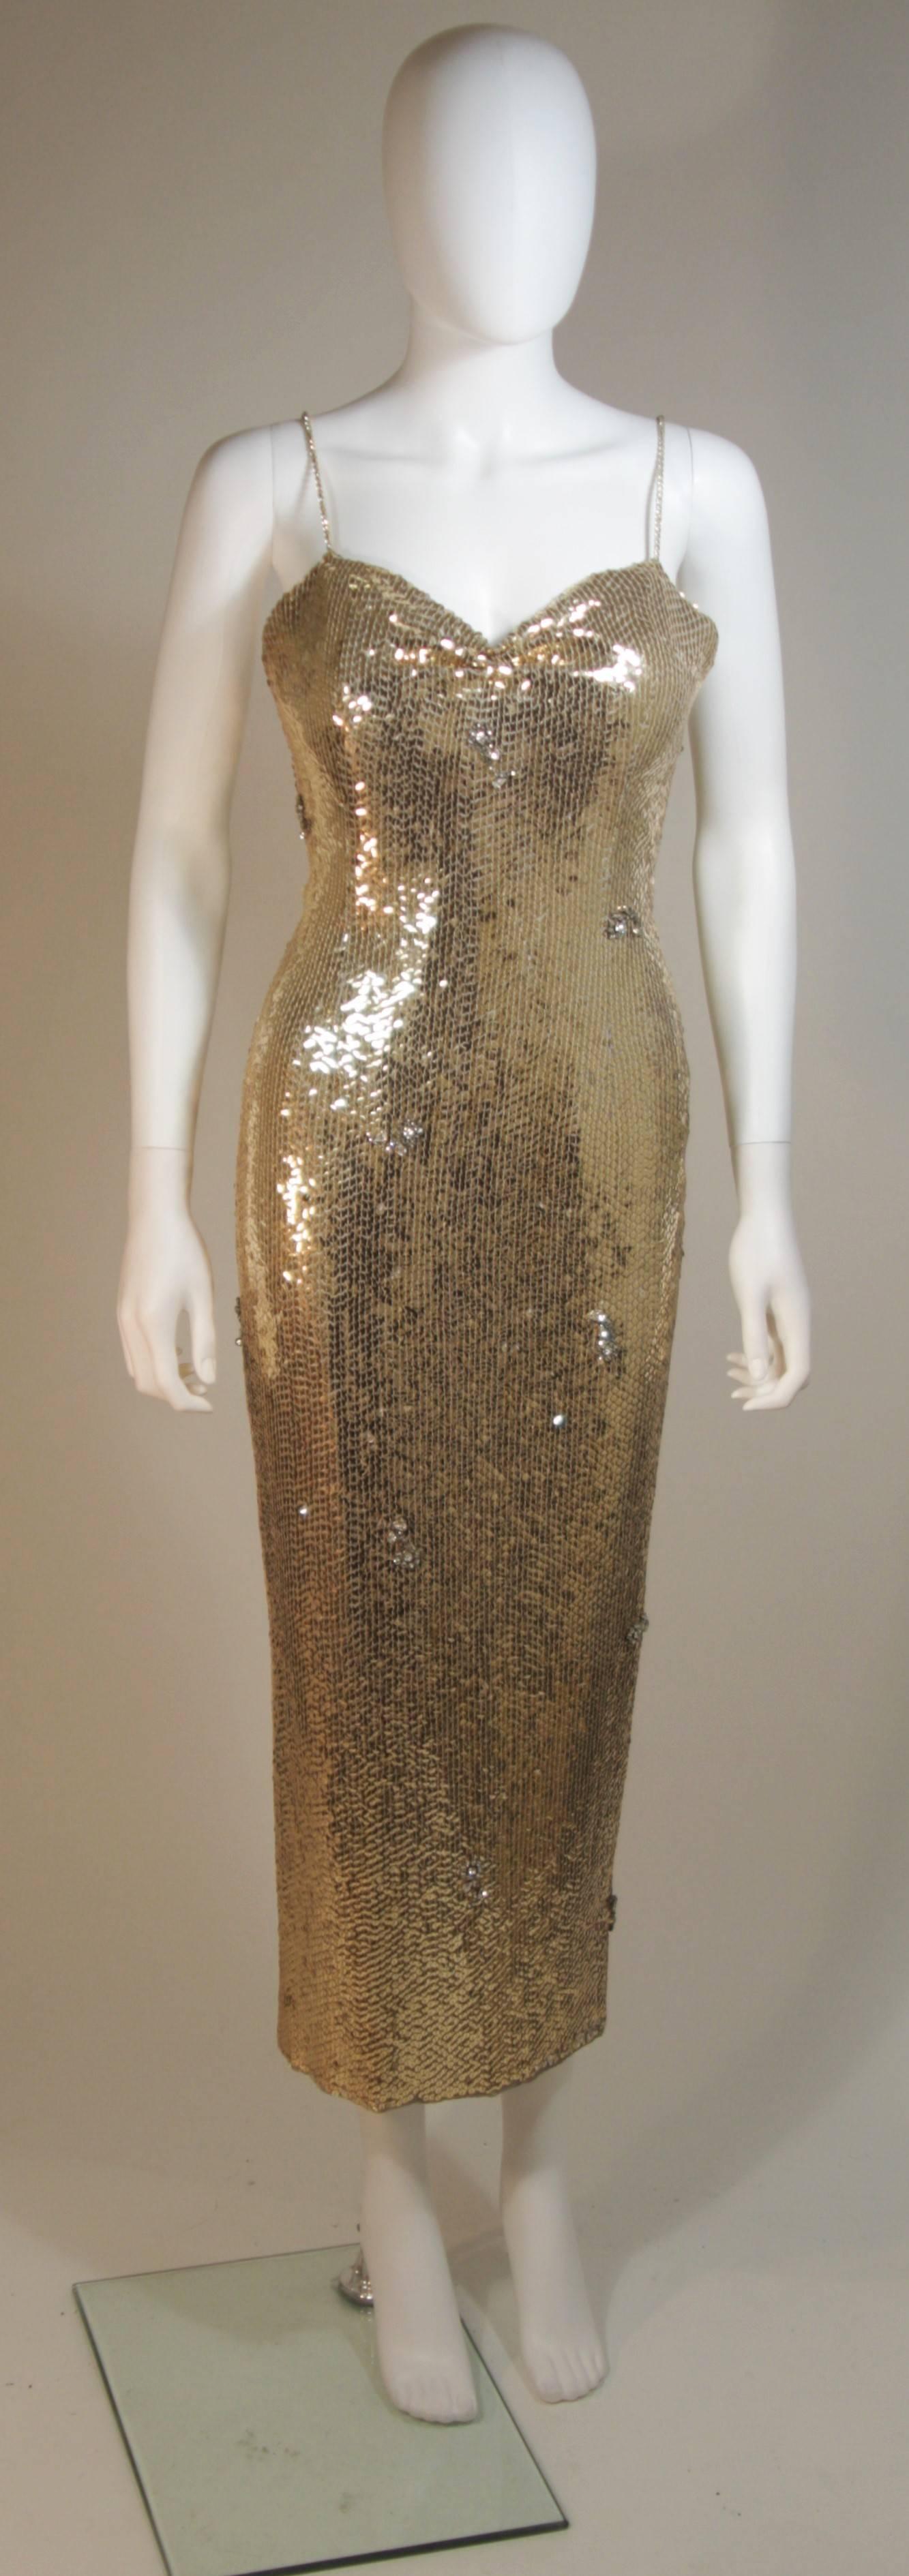 This ELIZABETH MASON COUTURE  gown is Originally from the 1960s however I  reinterpreted with my design team to give in a sexier, more contemporary flare. 
It is composed of a gold sequin fabric with scattered clear, floral, faceted rhinestone